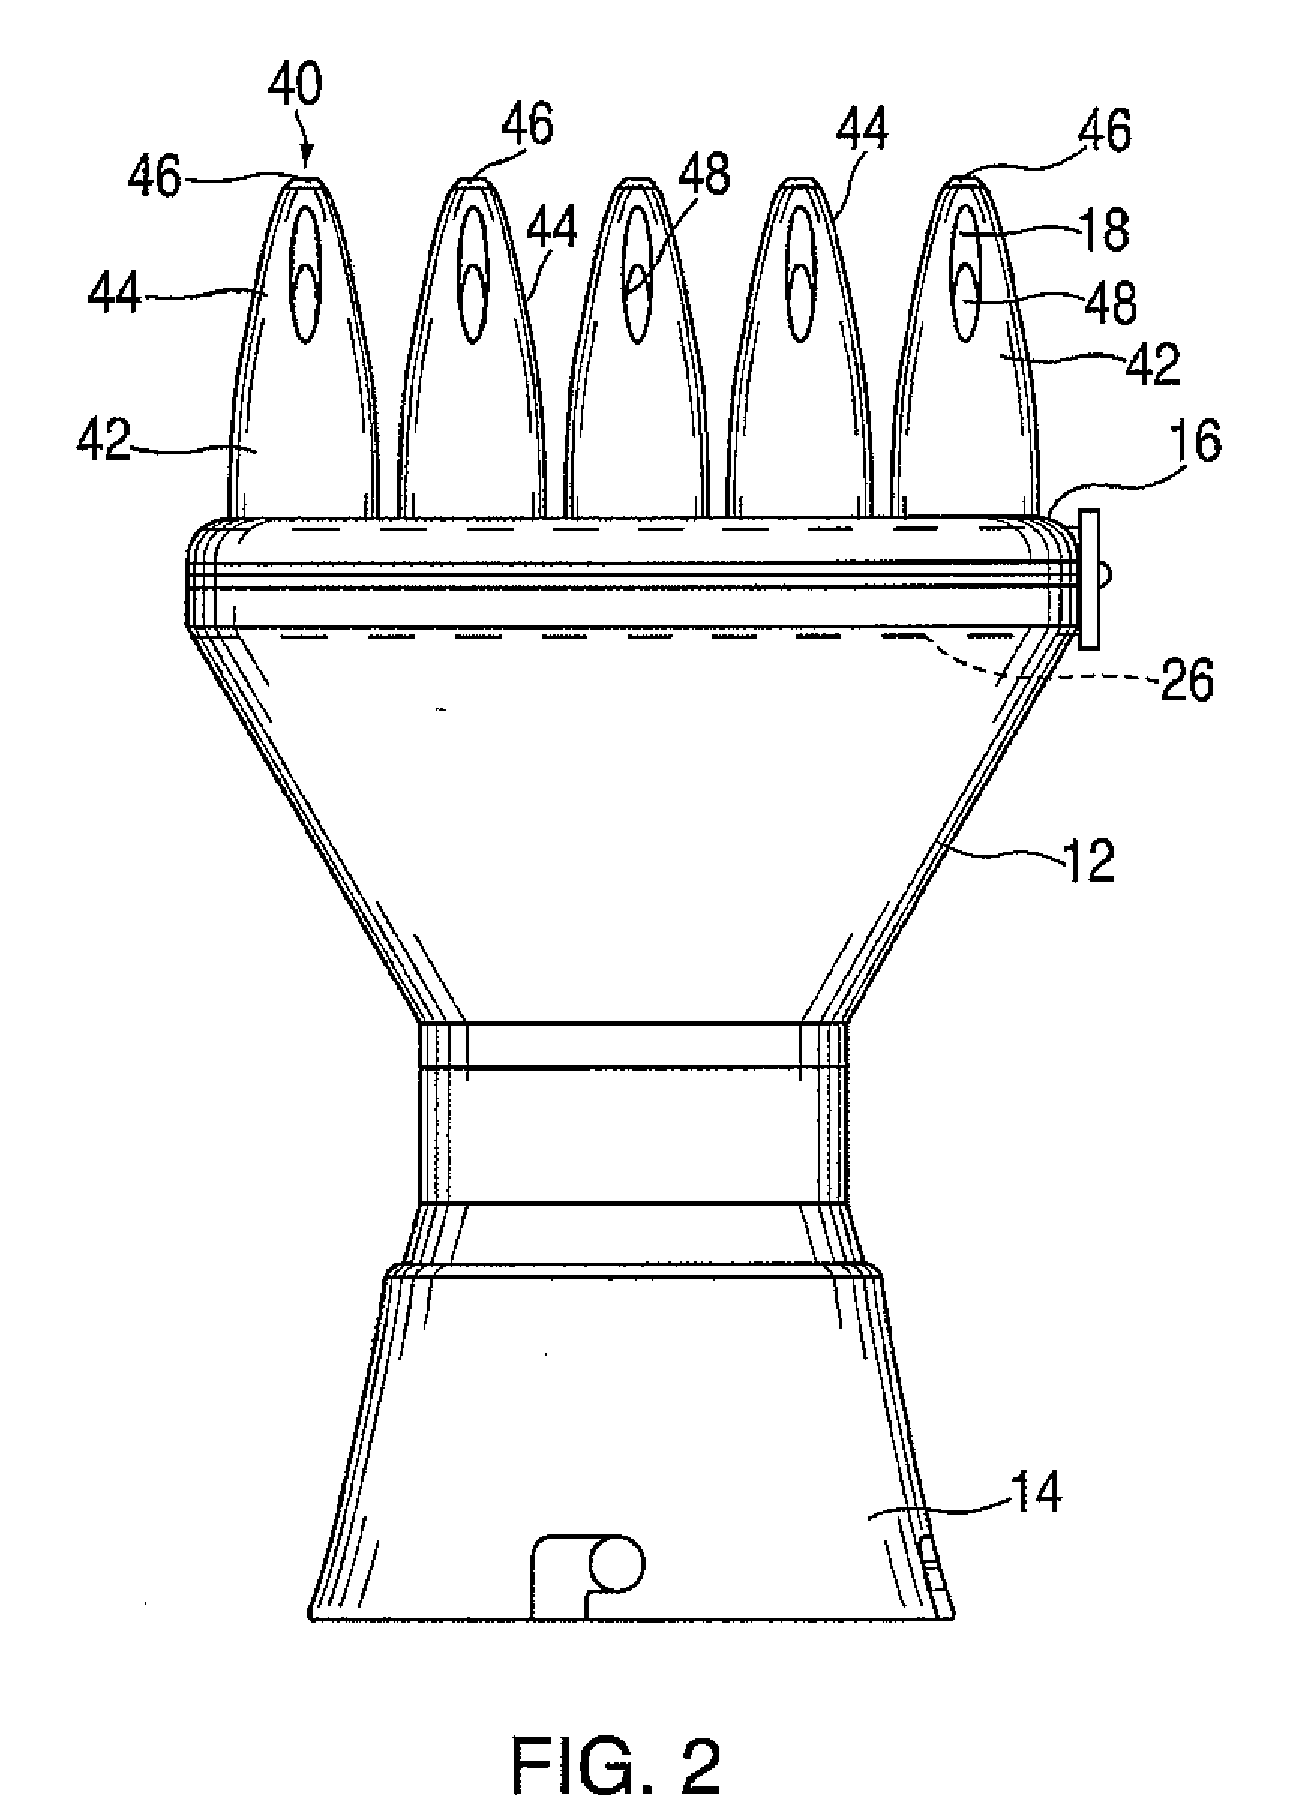 Conditioner applicator for heated hair styling device